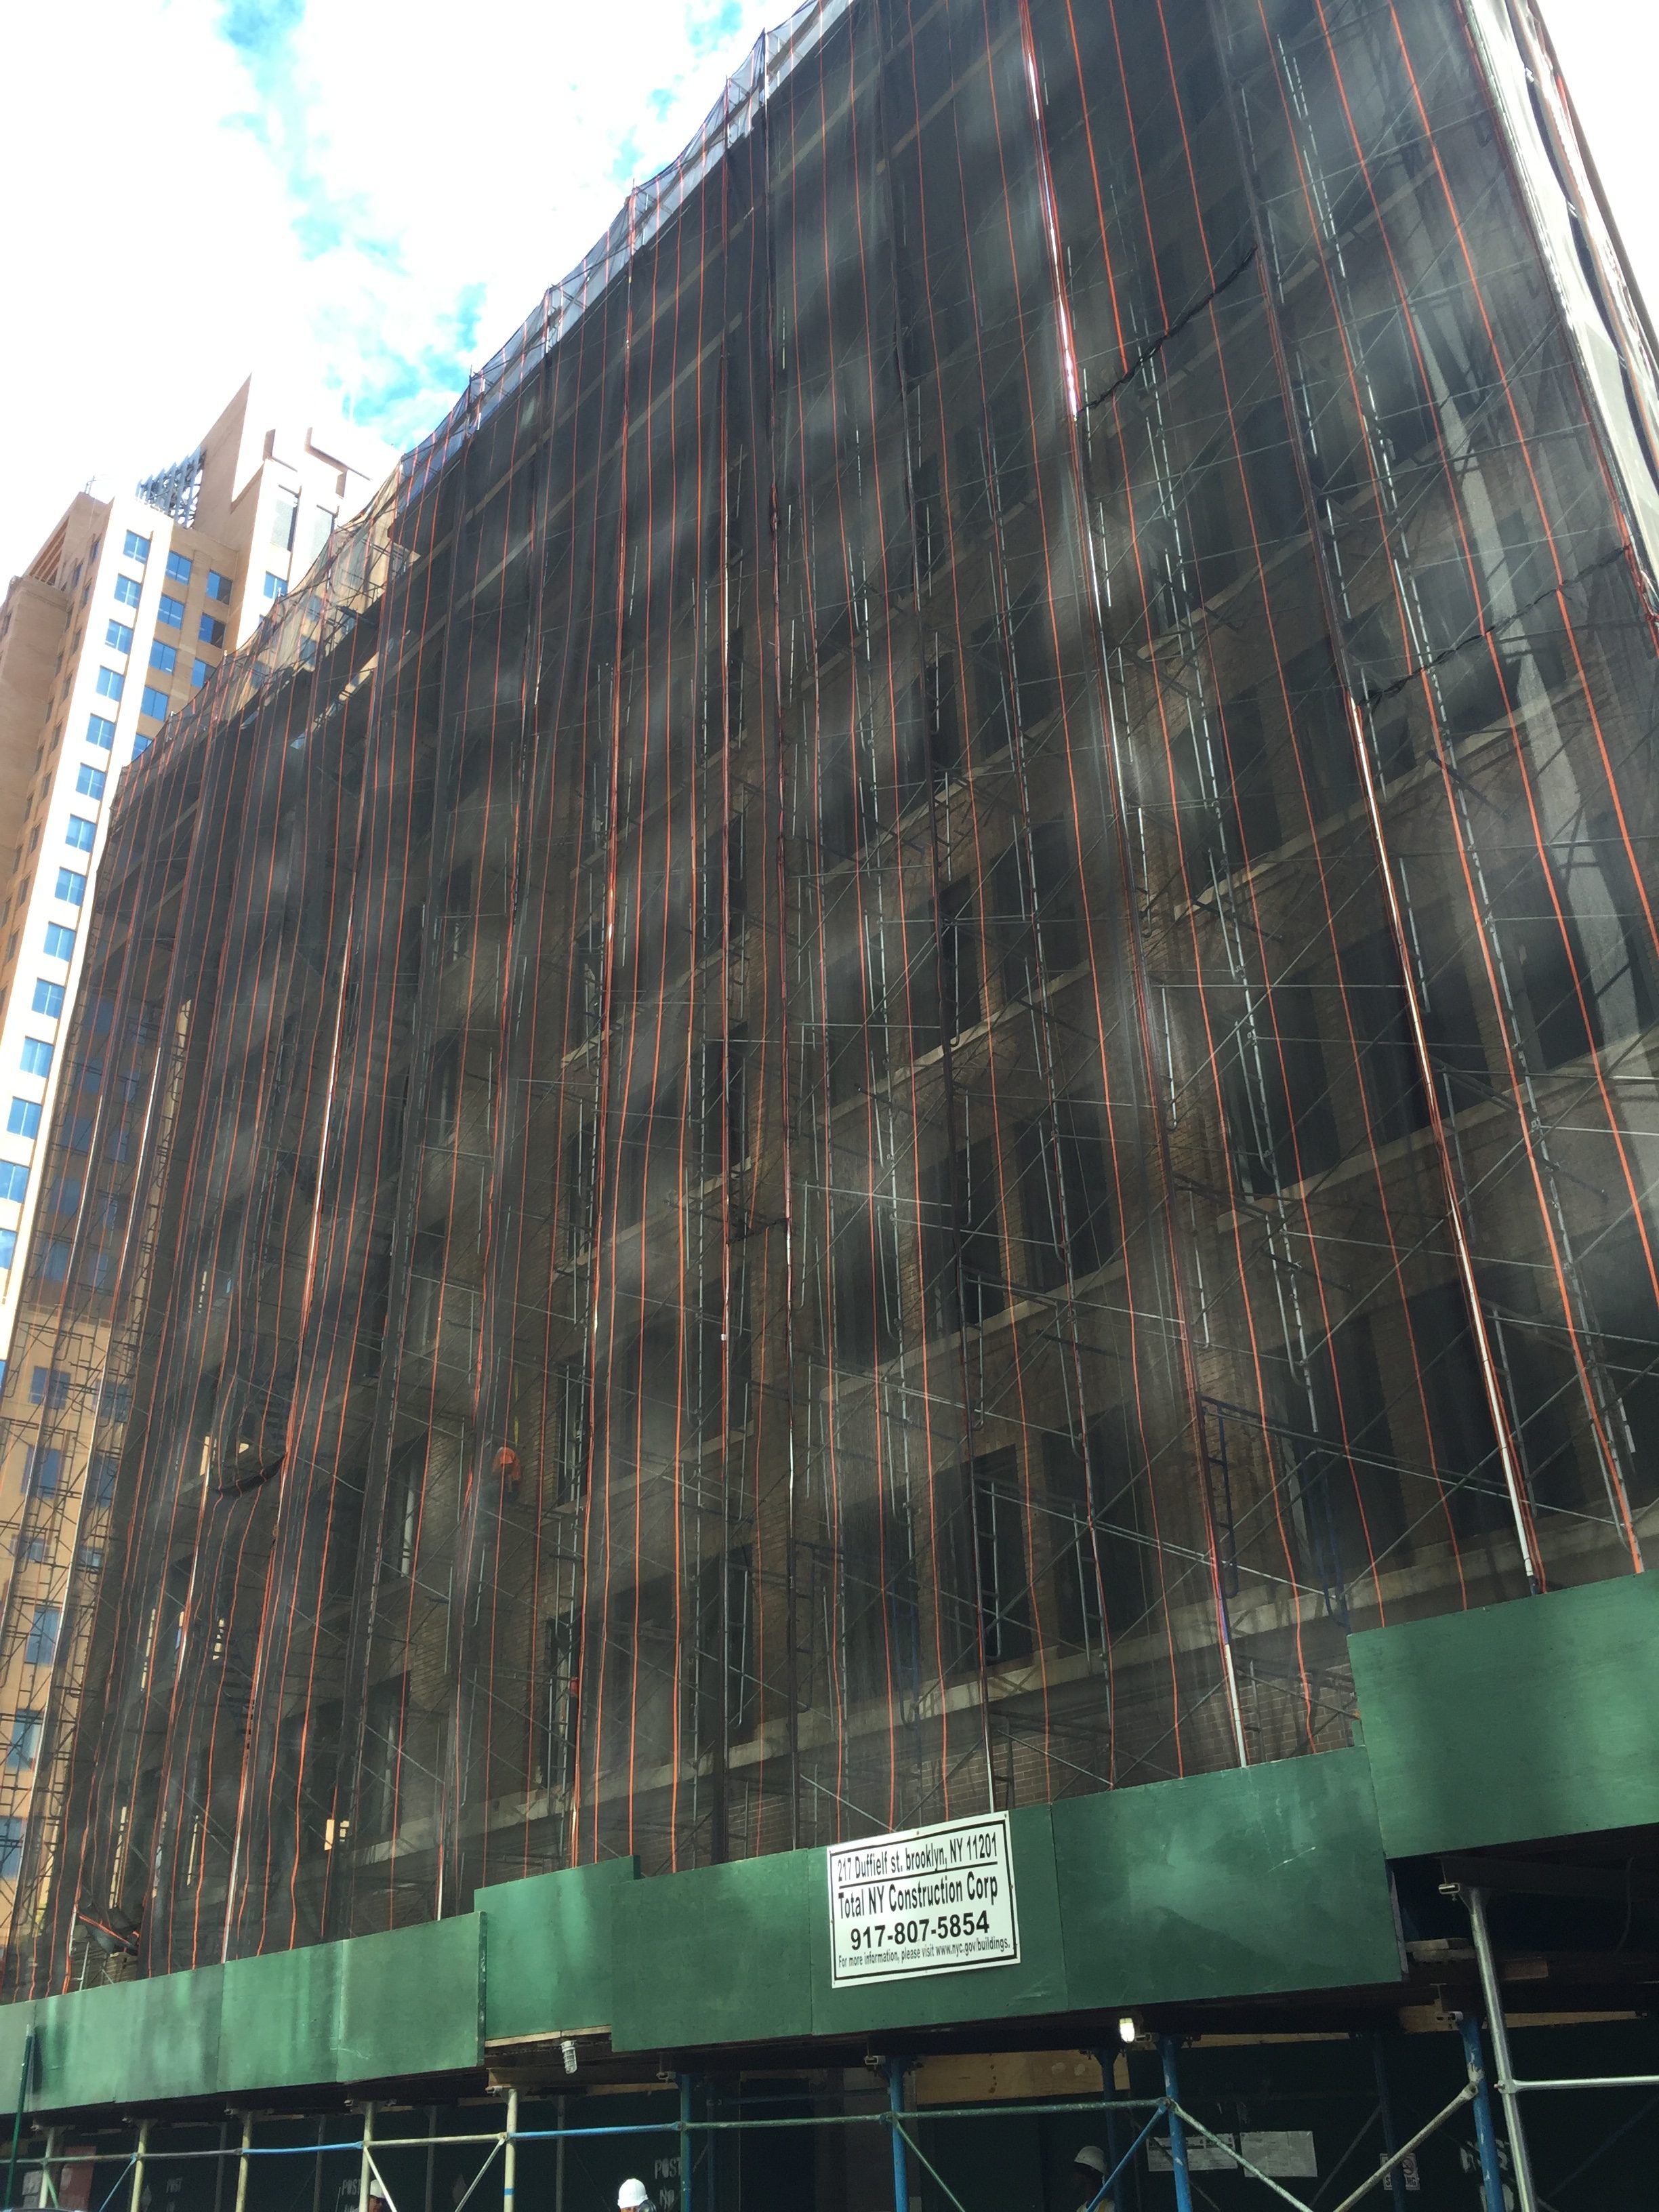 217 Duffield Street shrouded in scaffolding, photo by Tectonic